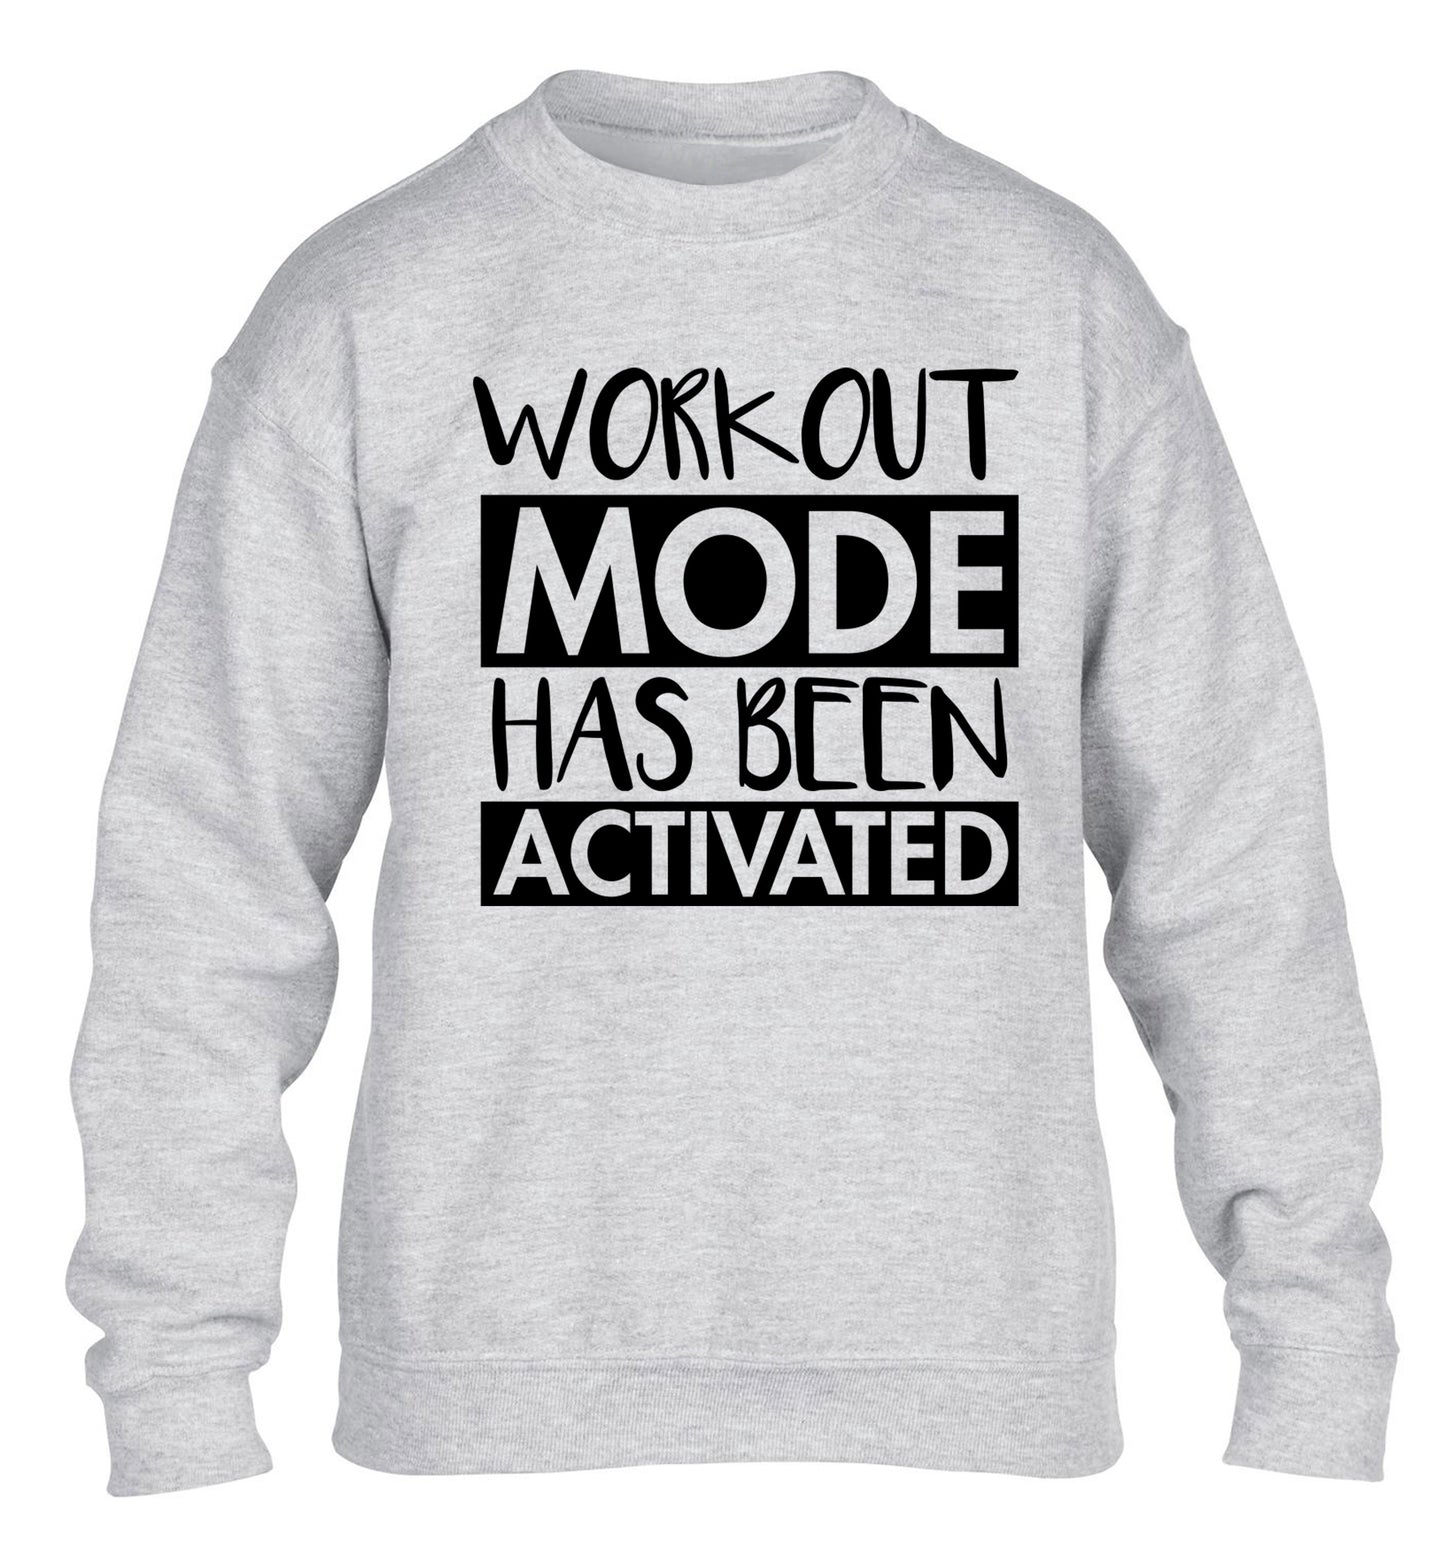 Workout mode has been activated children's grey sweater 12-14 Years